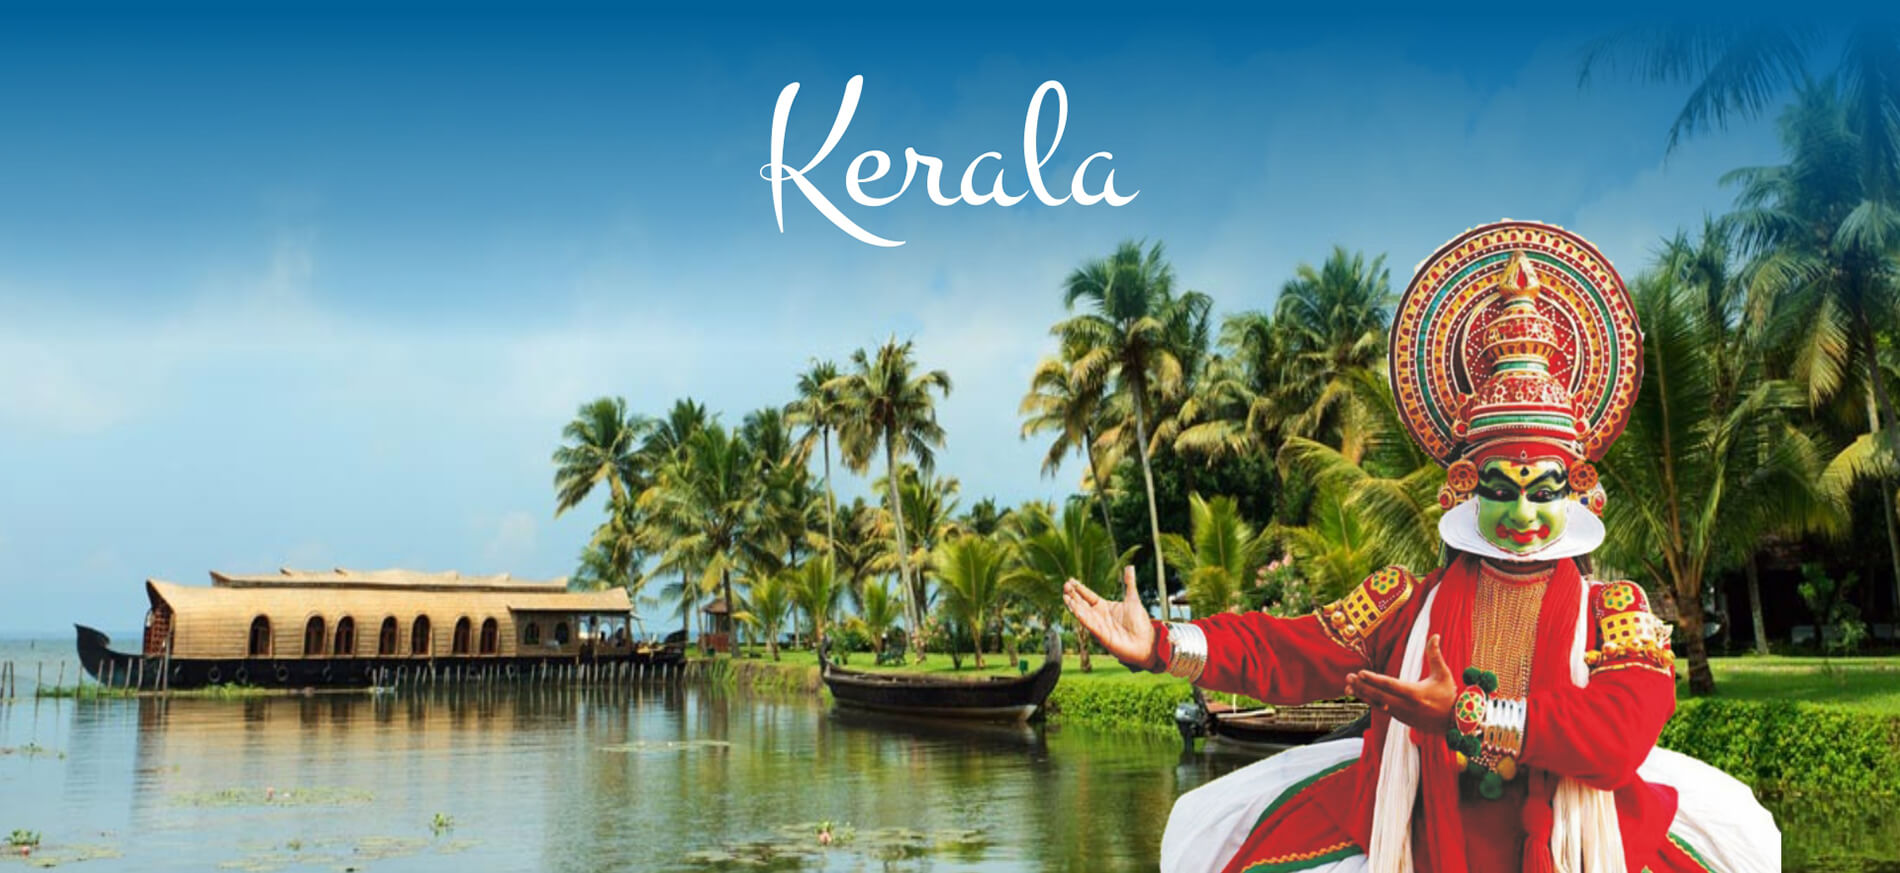 Kerala Tour Packages | Book Kerala Holiday Tour with Ajay Modi TravelsTour and TravelsTour PackagesAll IndiaAmritsar